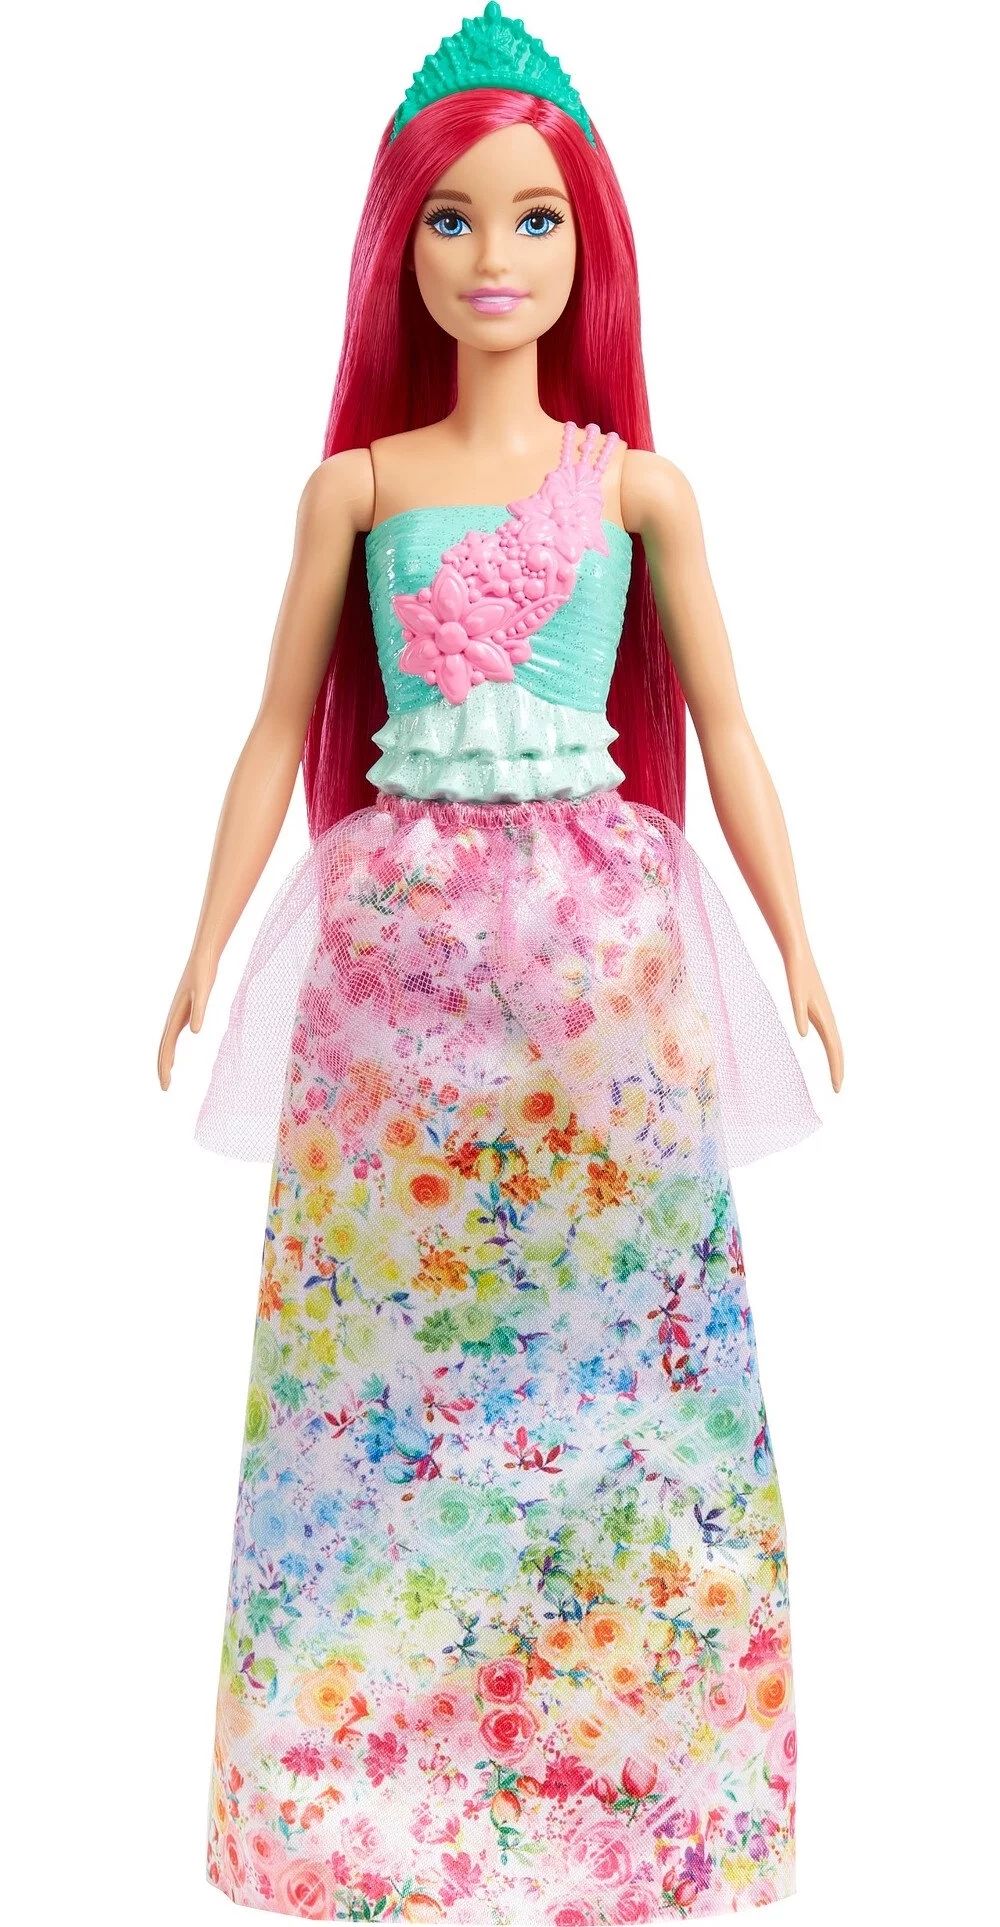 Barbie Dreamtopia Royal Doll with Dark-Pink Hair Wearing Removable Skirt, Shoes & Headband | Walmart (US)